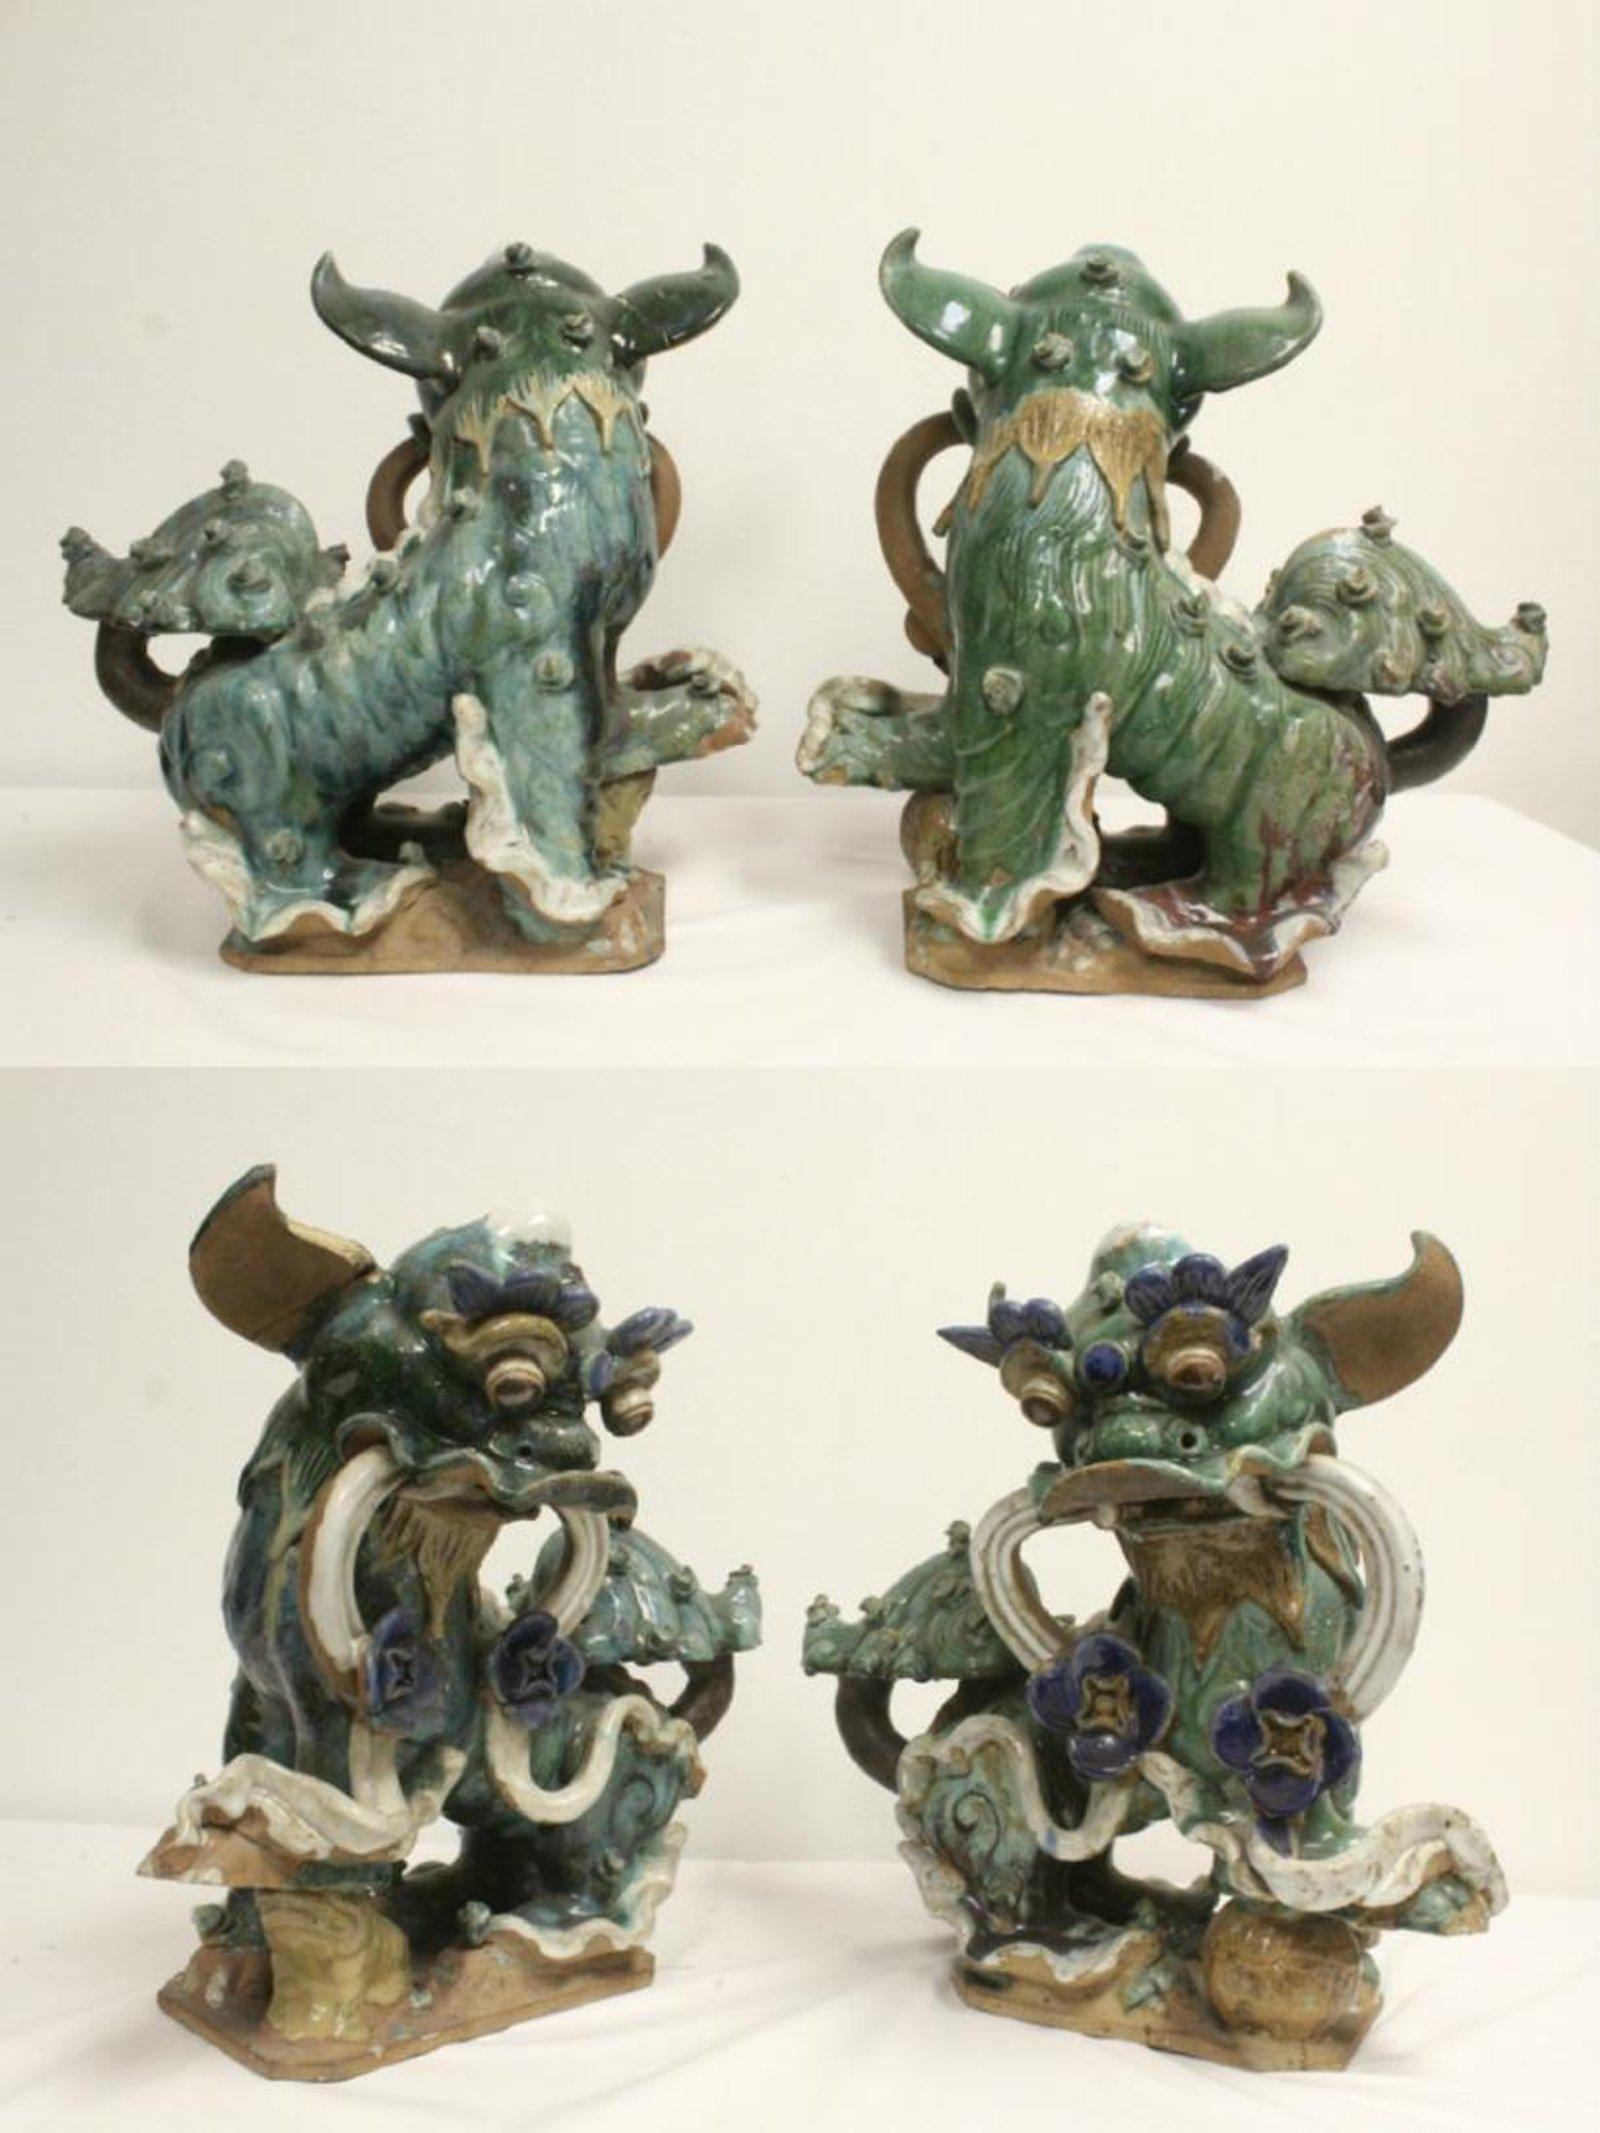 Imposing pair of Chinese glazed pottery Fu Lions, first half of the 20th century.
Beautifully painted with green, blue and white partially glazed. They both have an intriguing mystical look.

Base dimensions: 7 inches x 10 inches
The Fu Lion